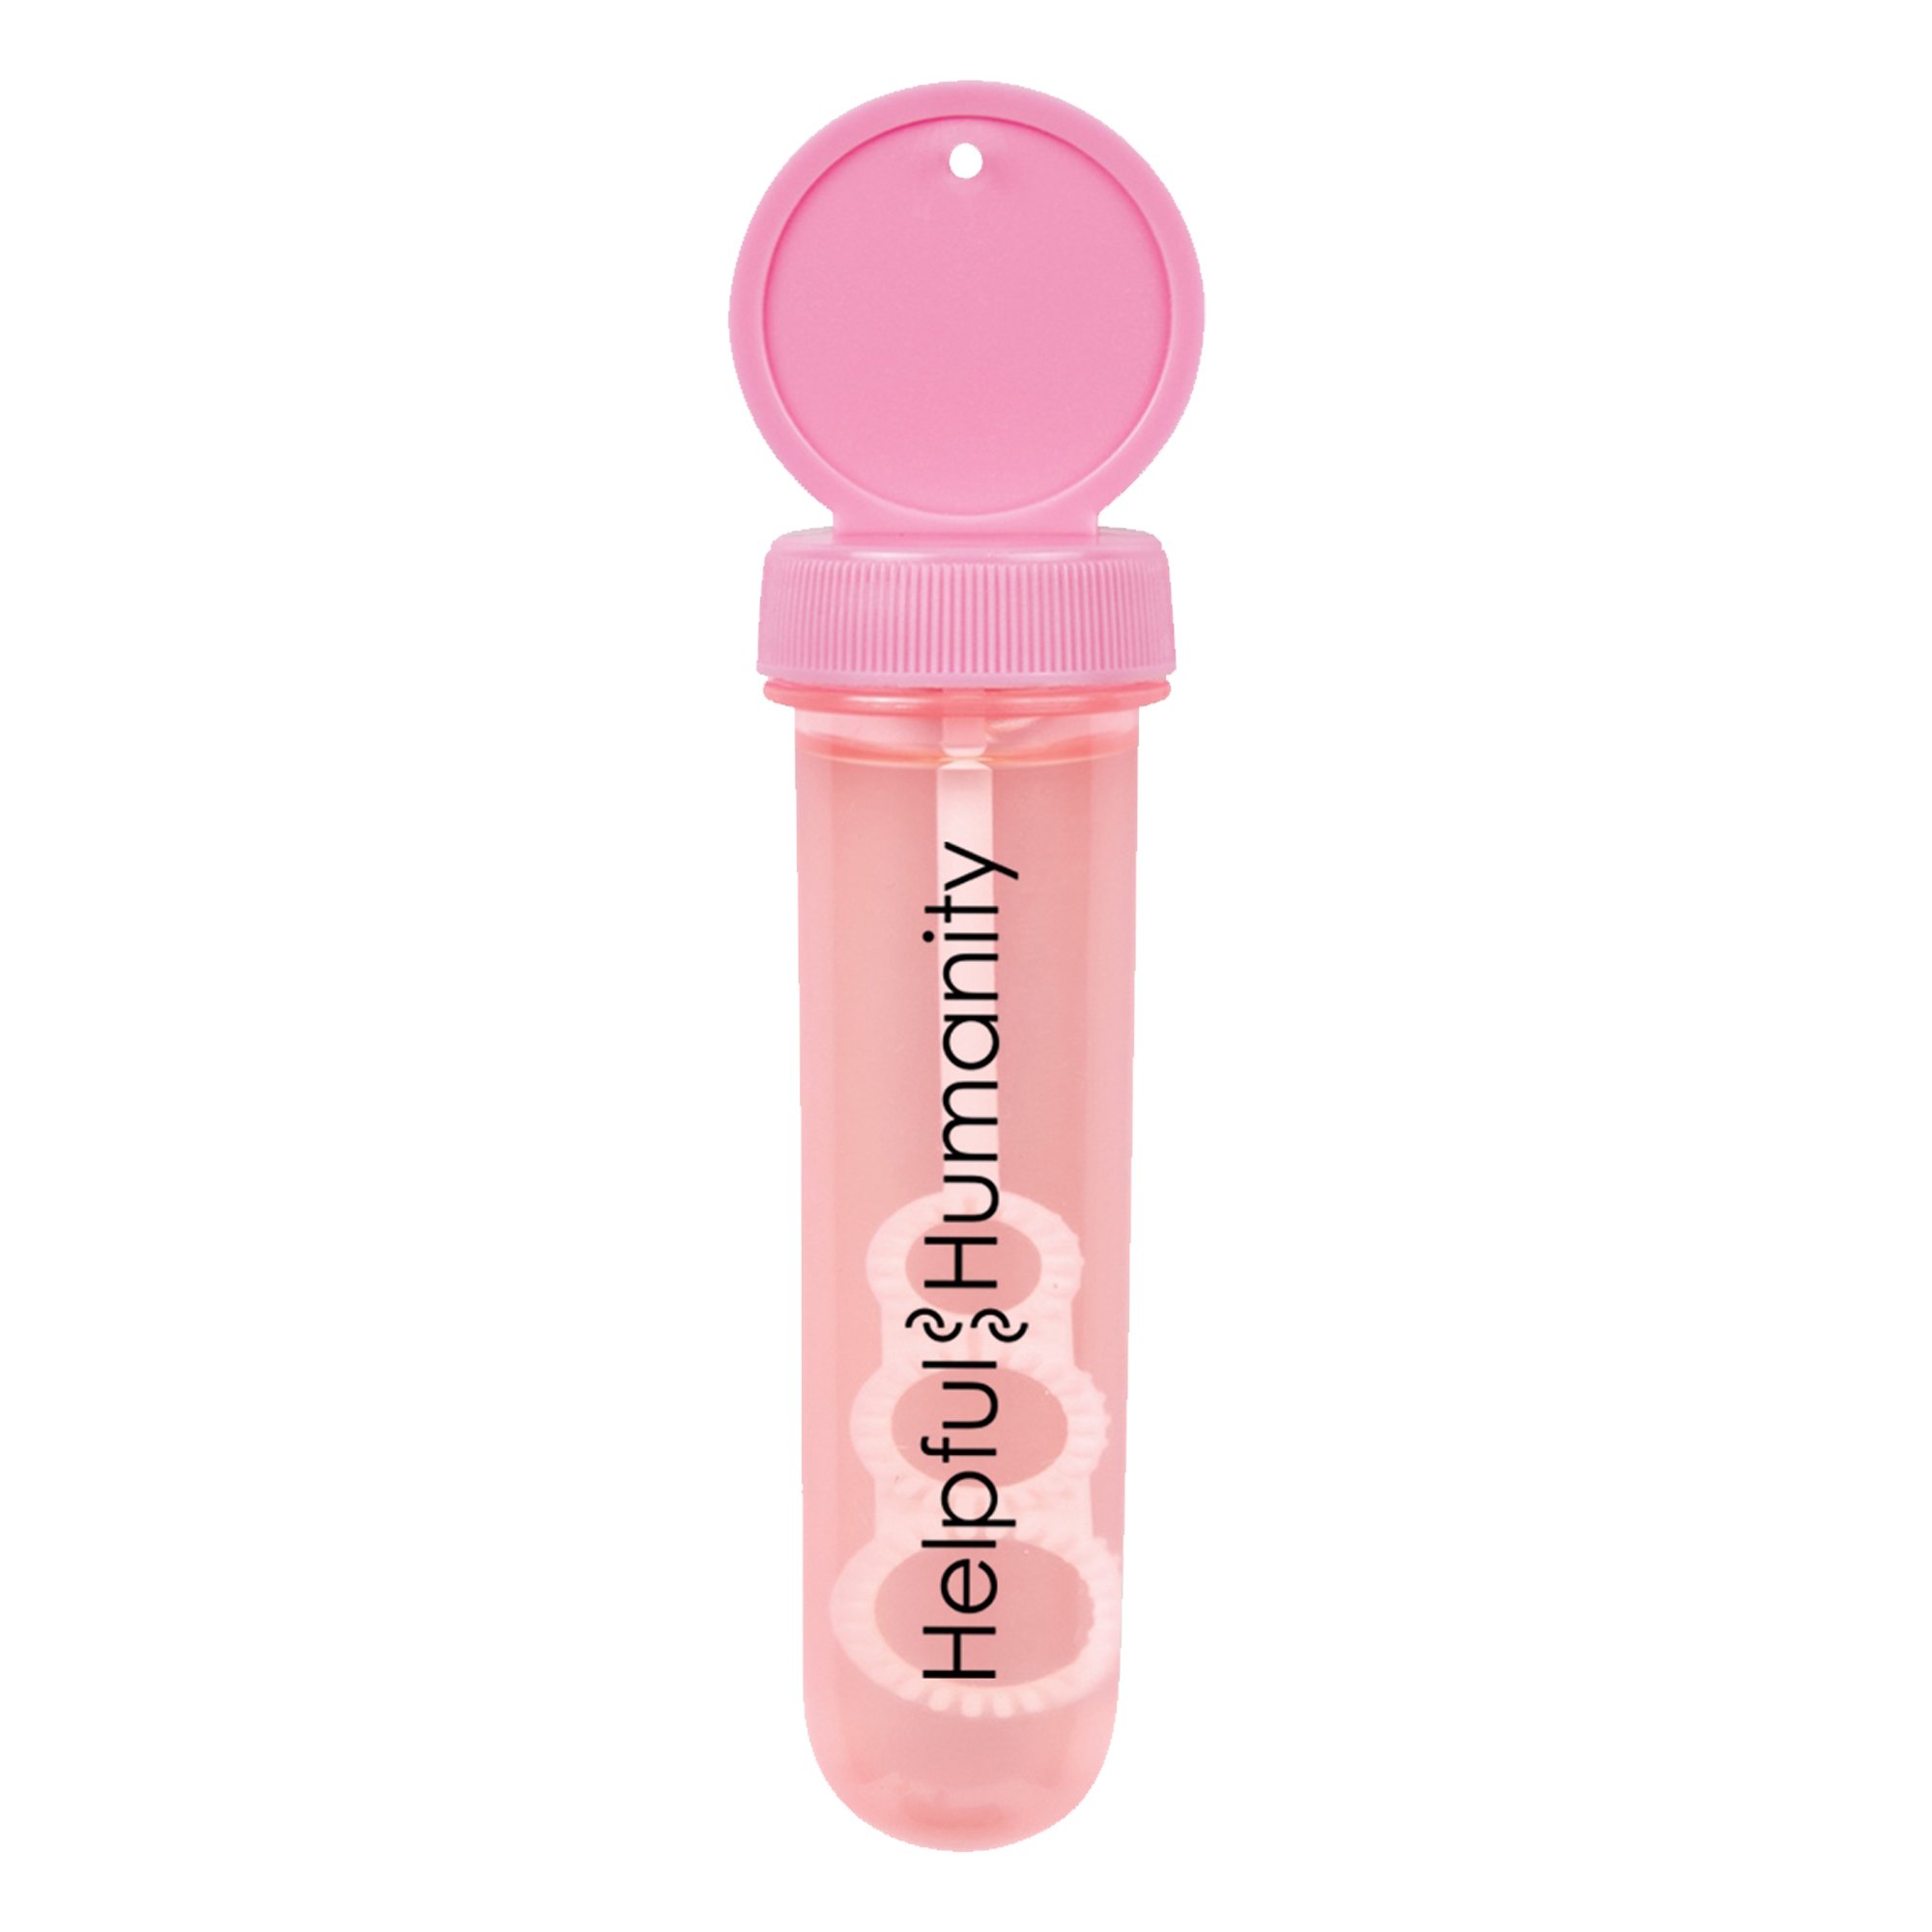 Hours of fun for all ages! The 5" plastic tube features a tiny bubble wand. Available in 7 fun colours this bubble dispenser is great for parties or special events.